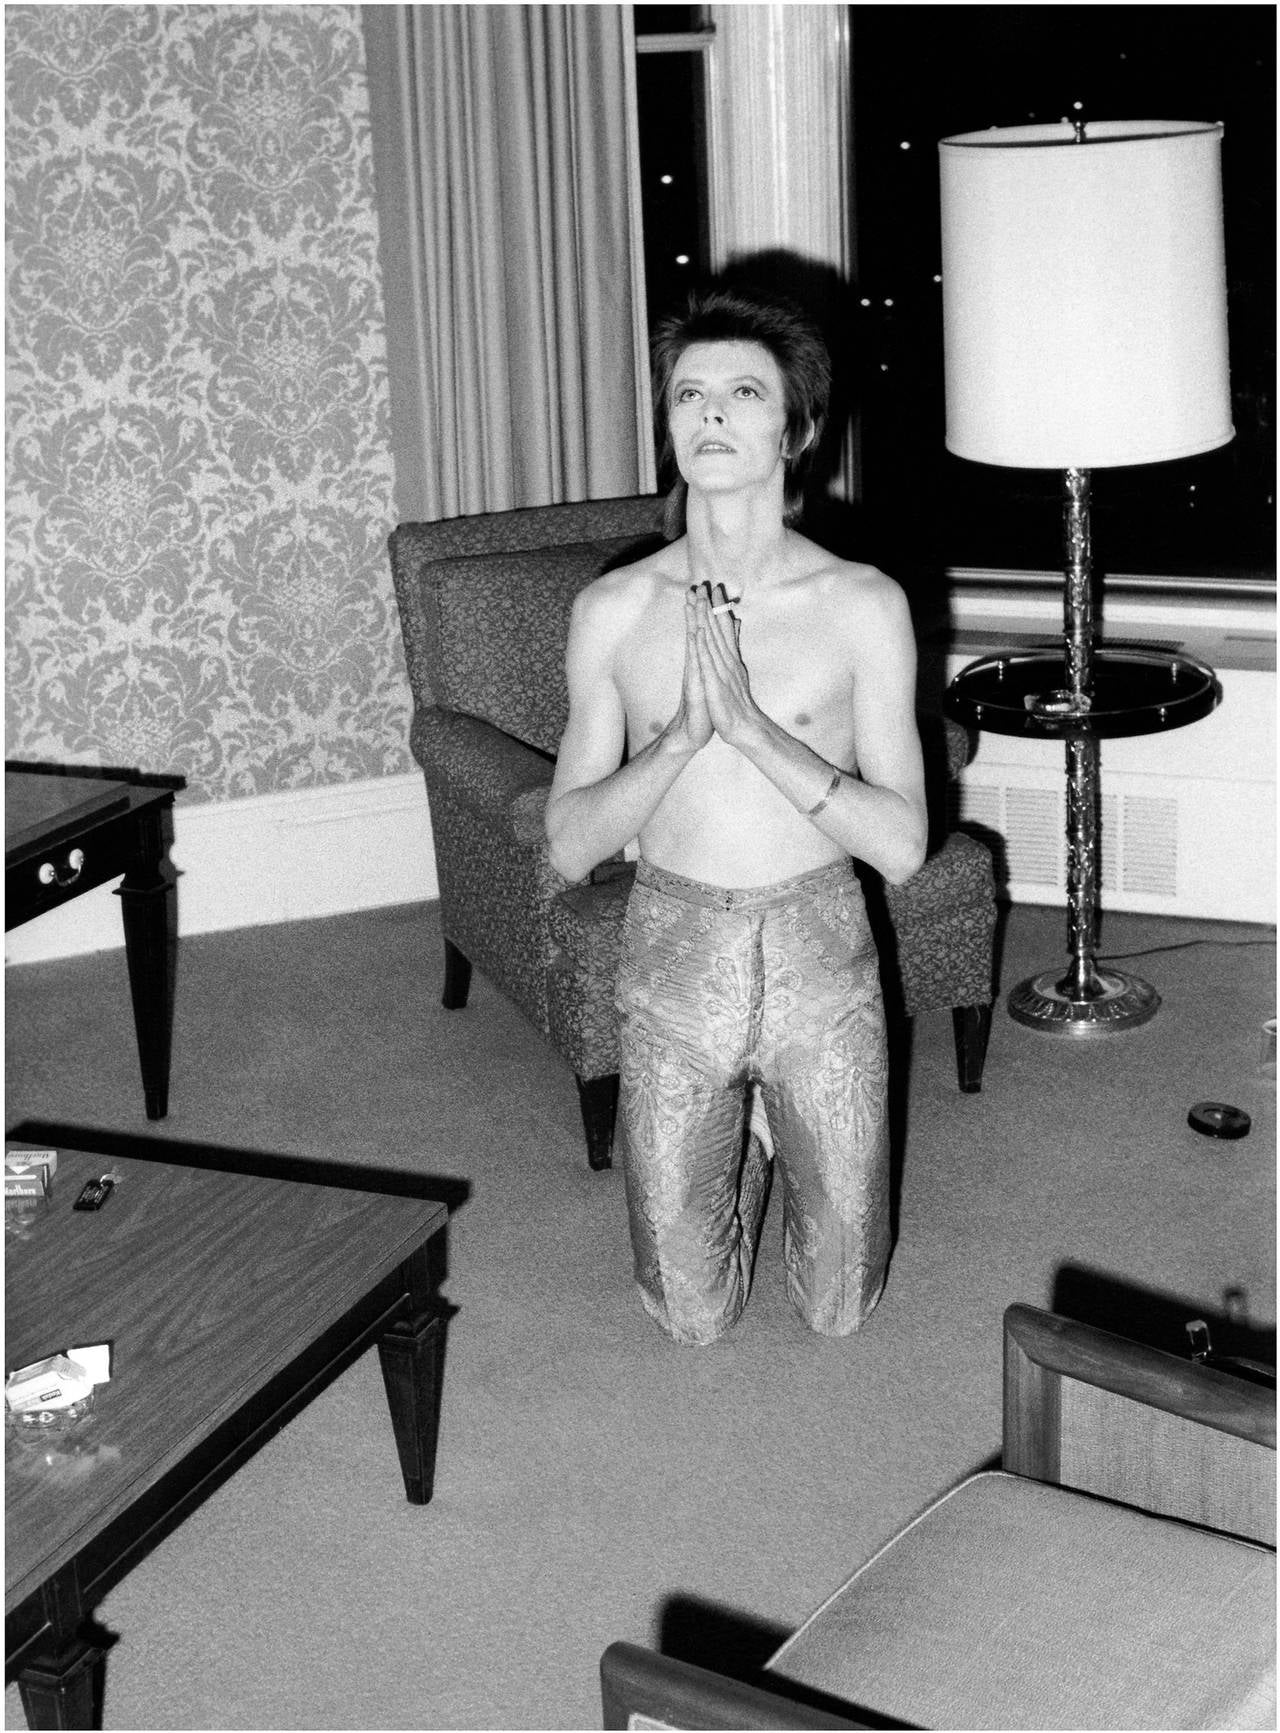 Mick Rock Figurative Photograph - Bowie Praying on Knees